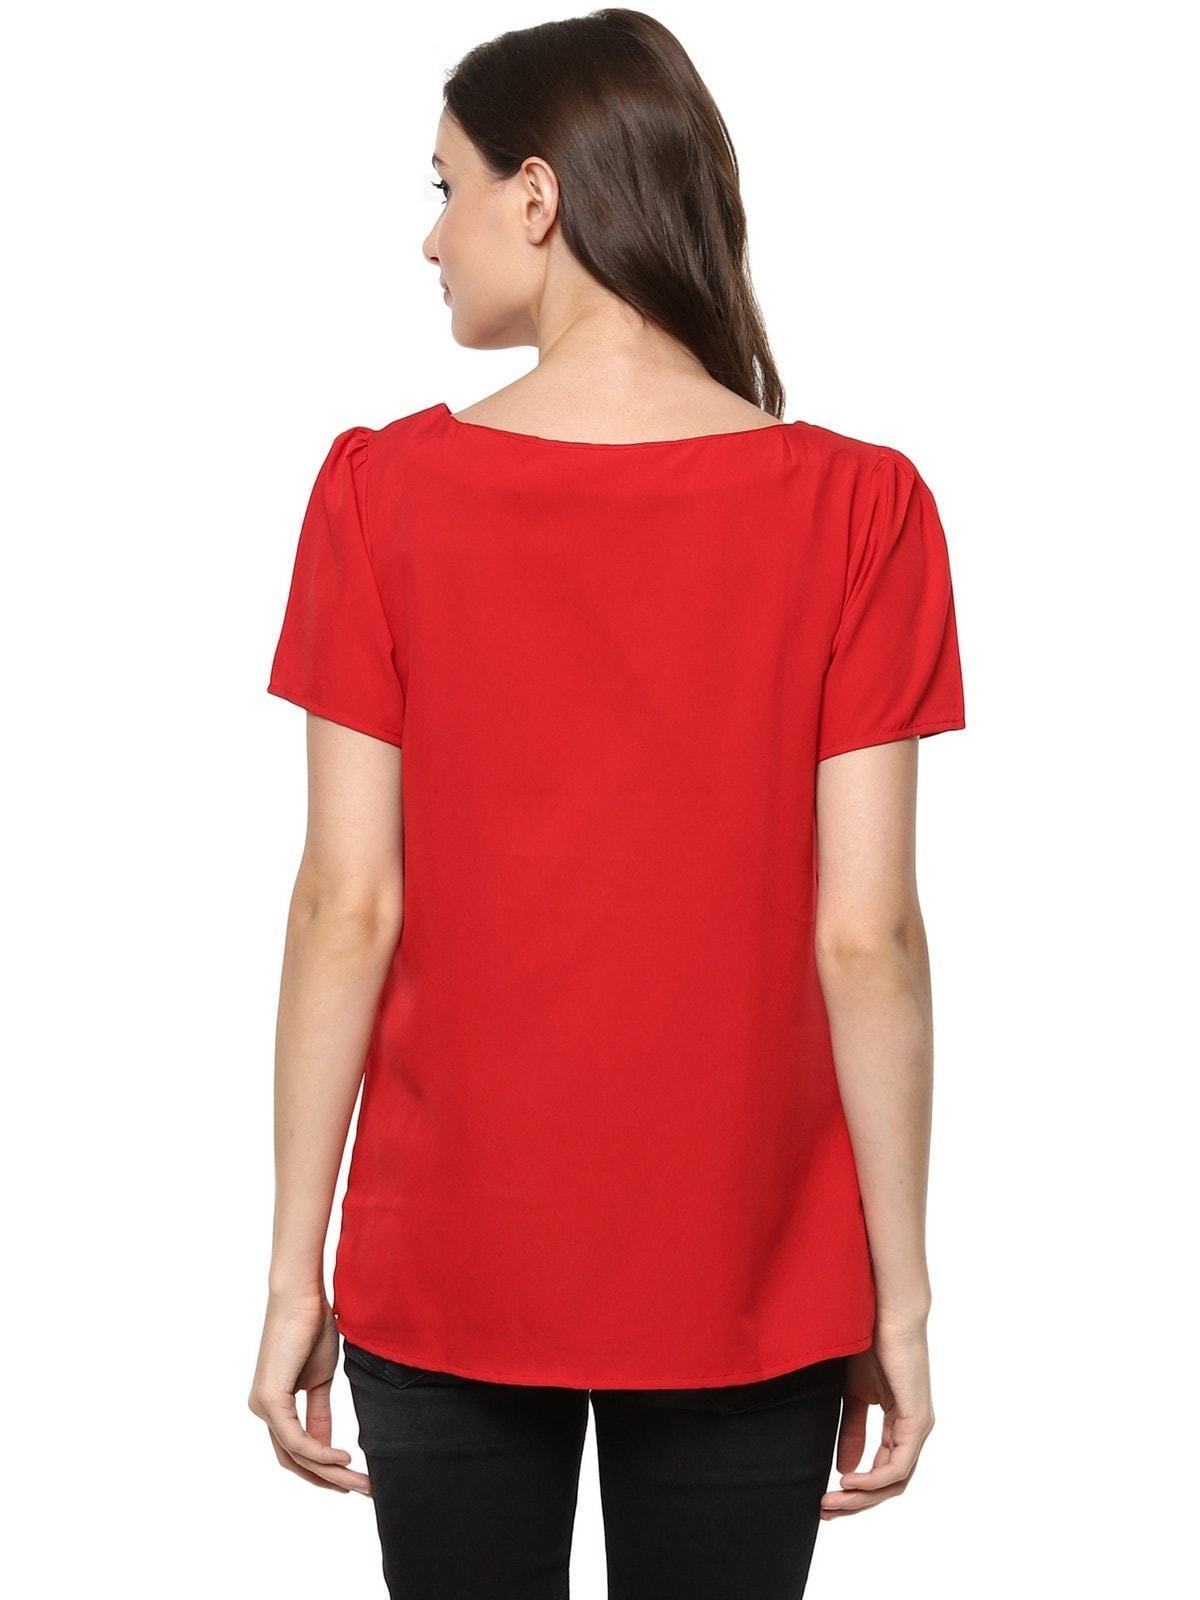 Women's Top Detailed With Gathered Sleeves And Diagonal Zip - Pannkh